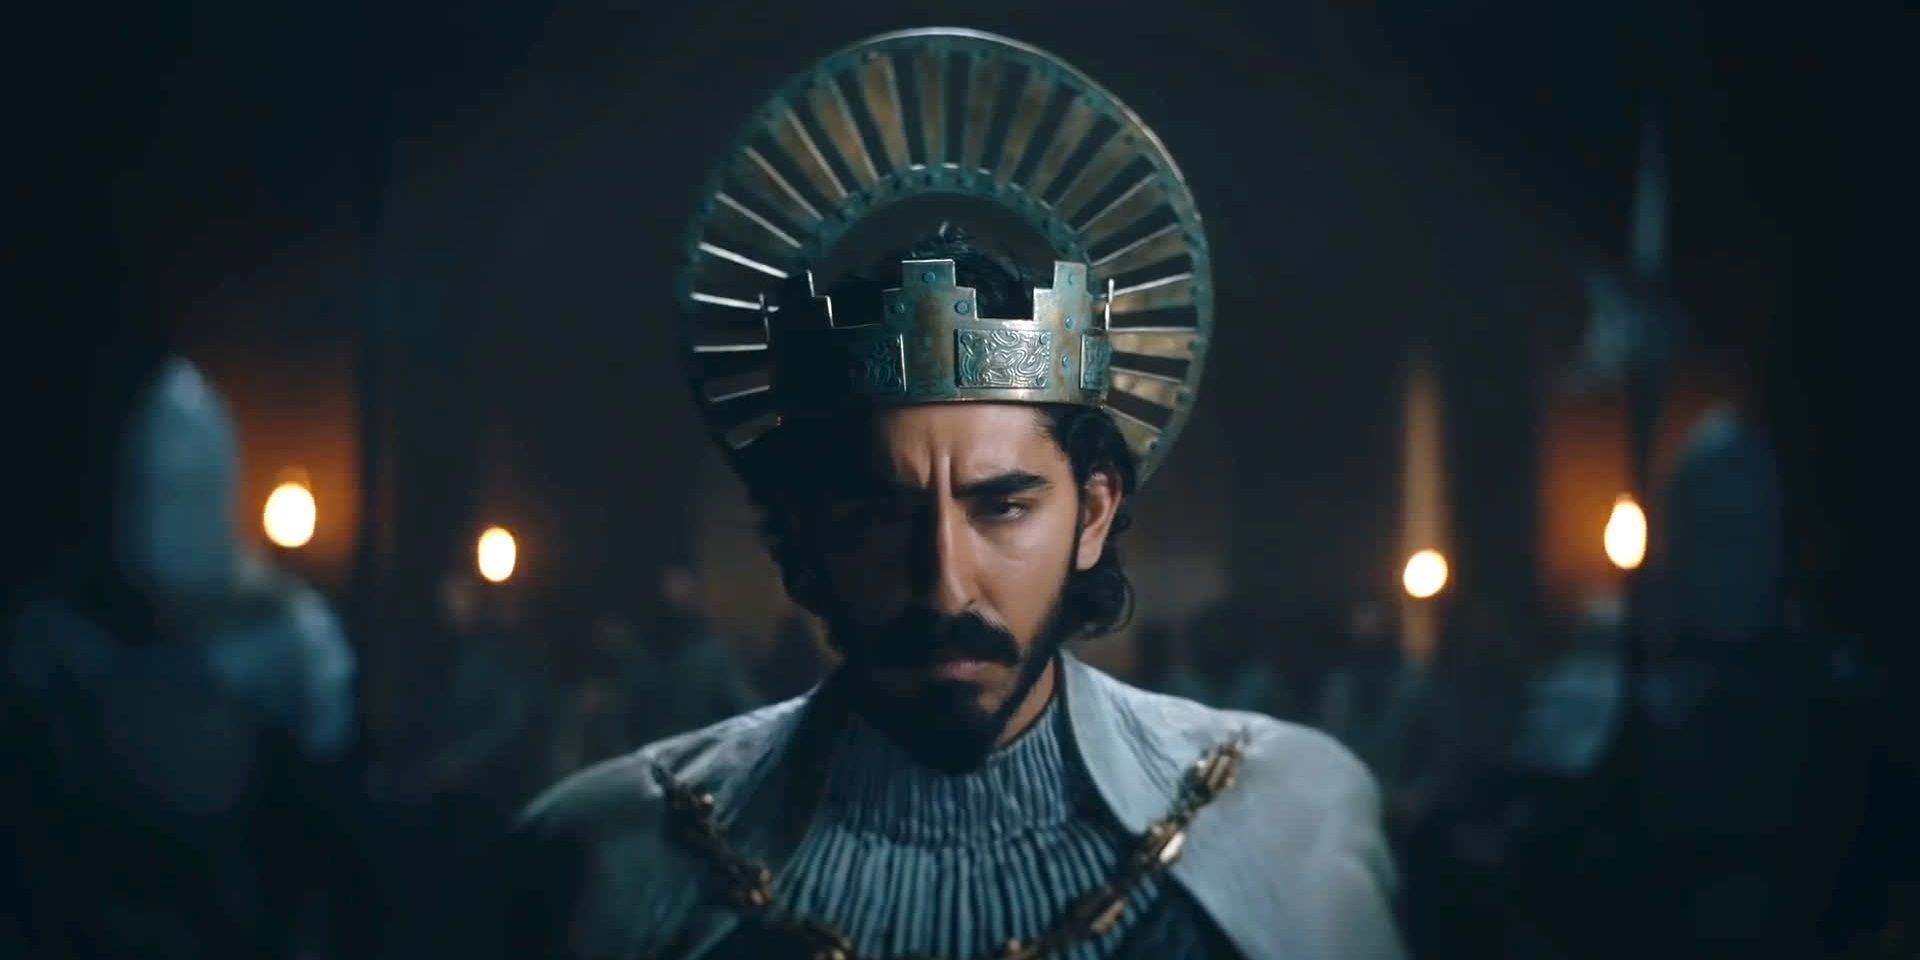 Dev Patel in a Crown Looking Serious in The Green Knight